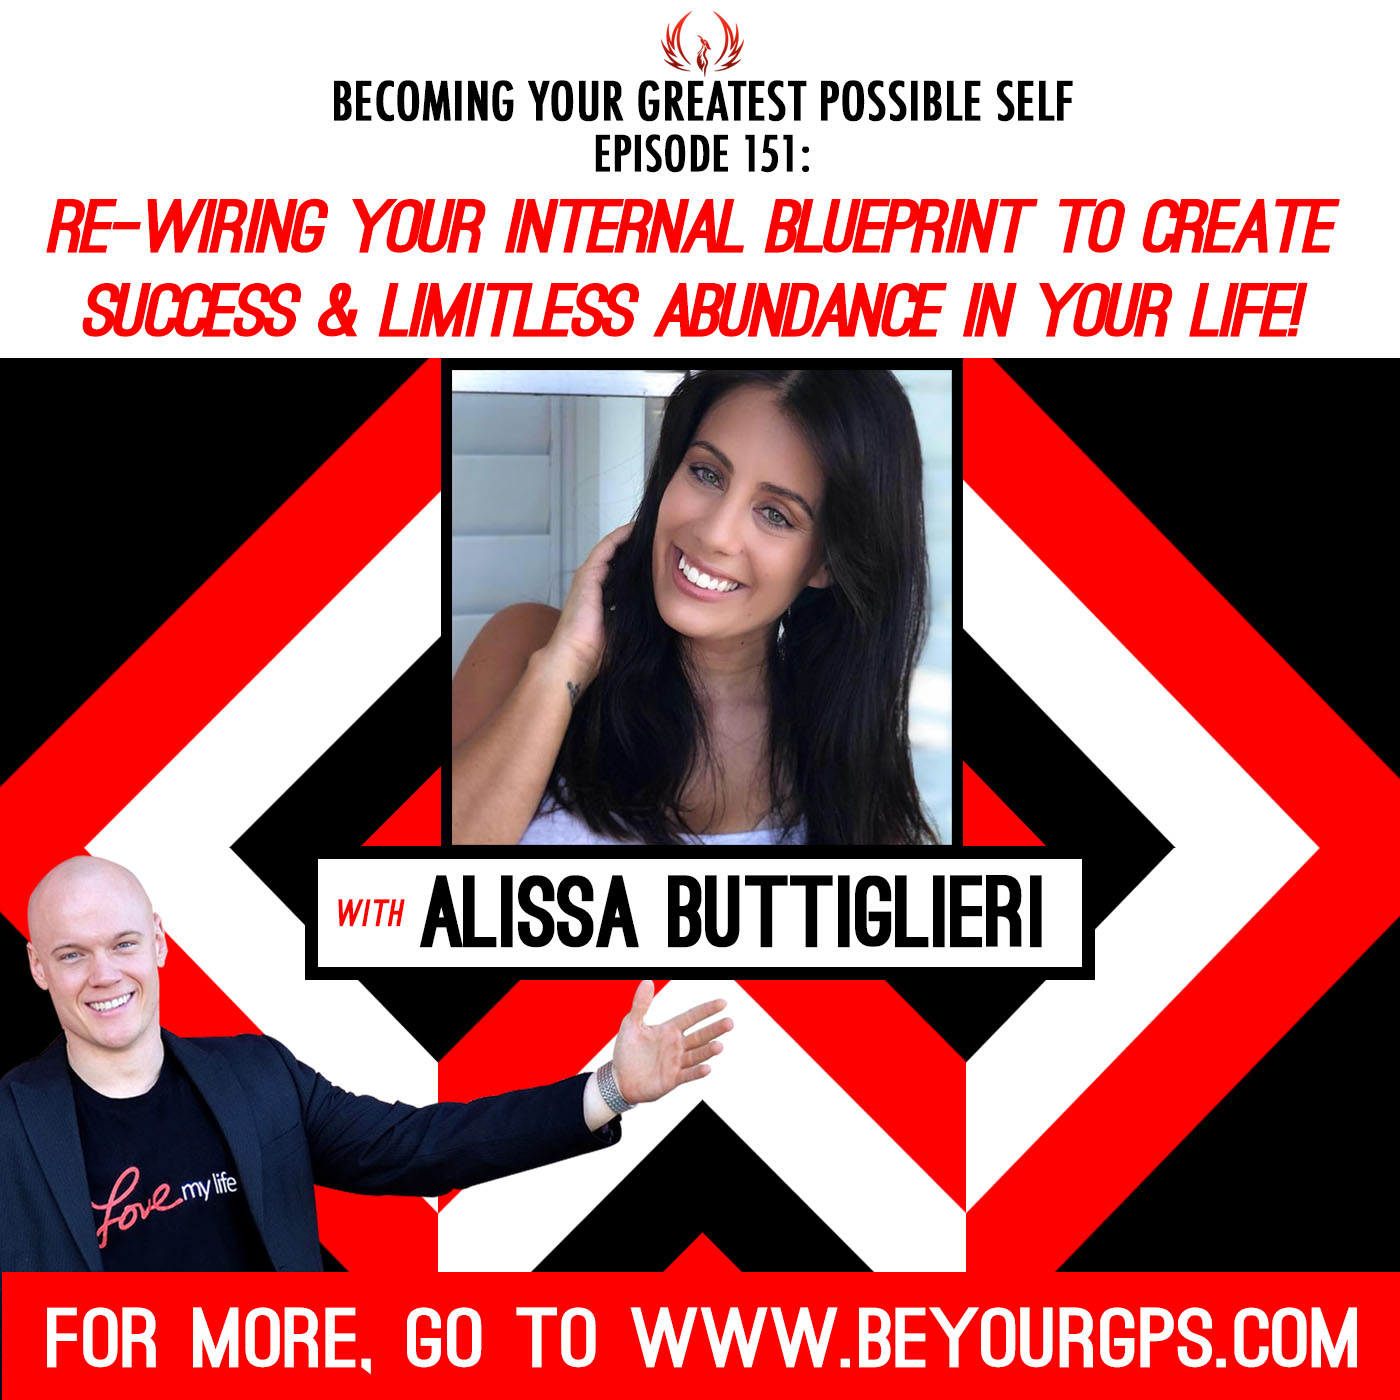 Re-Wiring Your INTERNAL Blueprint to Create Success & Limitless Abundance in Your Life! with Alissa Buttiglieri